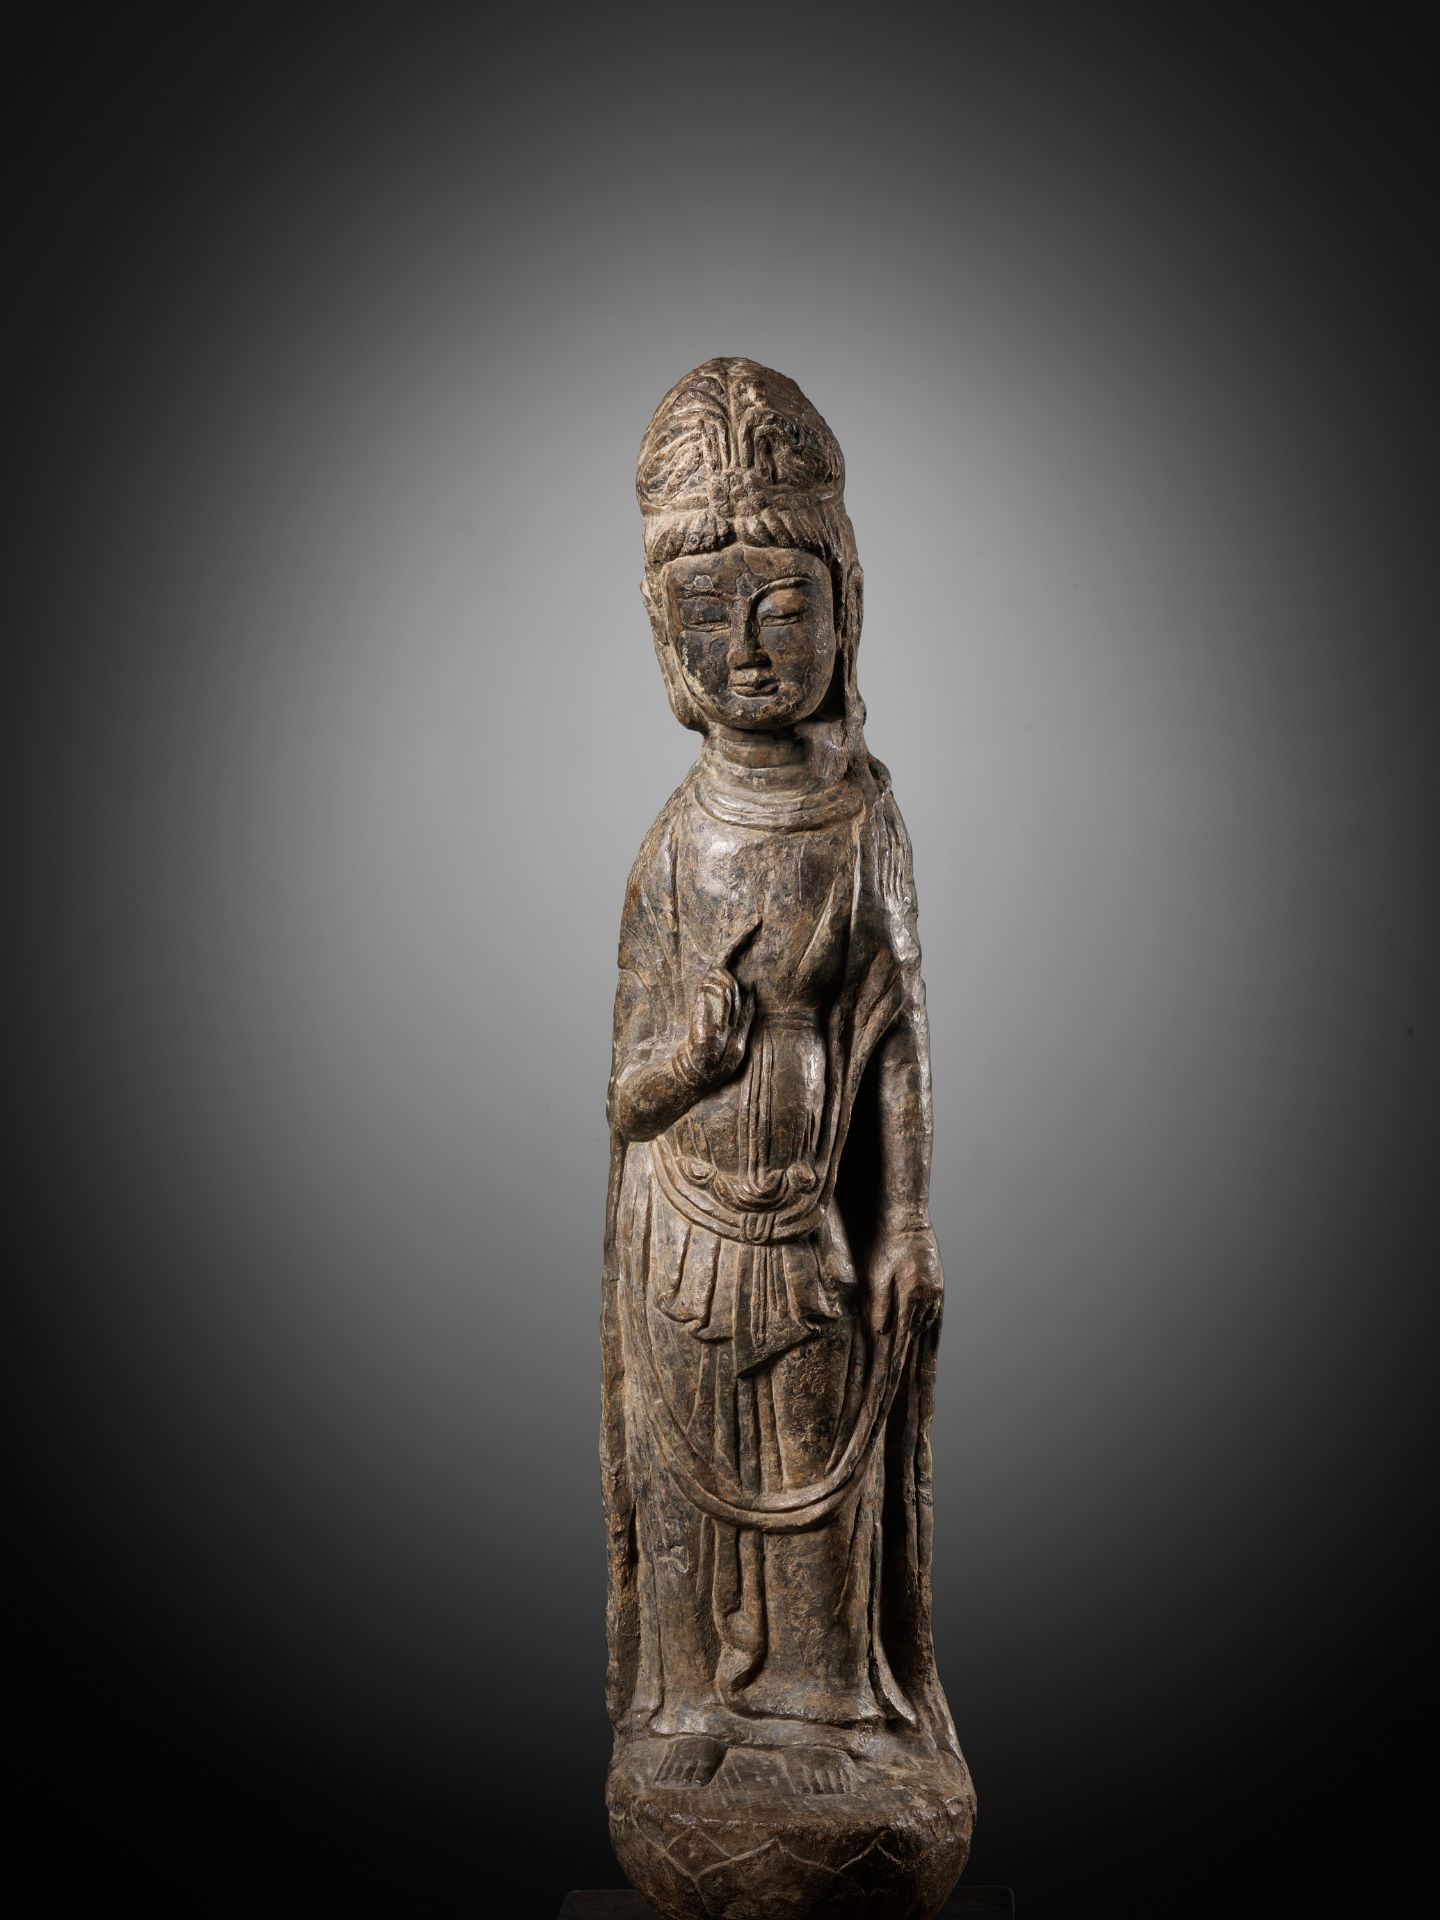 A RARE AND IMPORTANT LIMESTONE FIGURE OF A BODHISATTVA, LONGMEN GROTTOES, NORTHERN WEI DYNASTY - Image 19 of 19